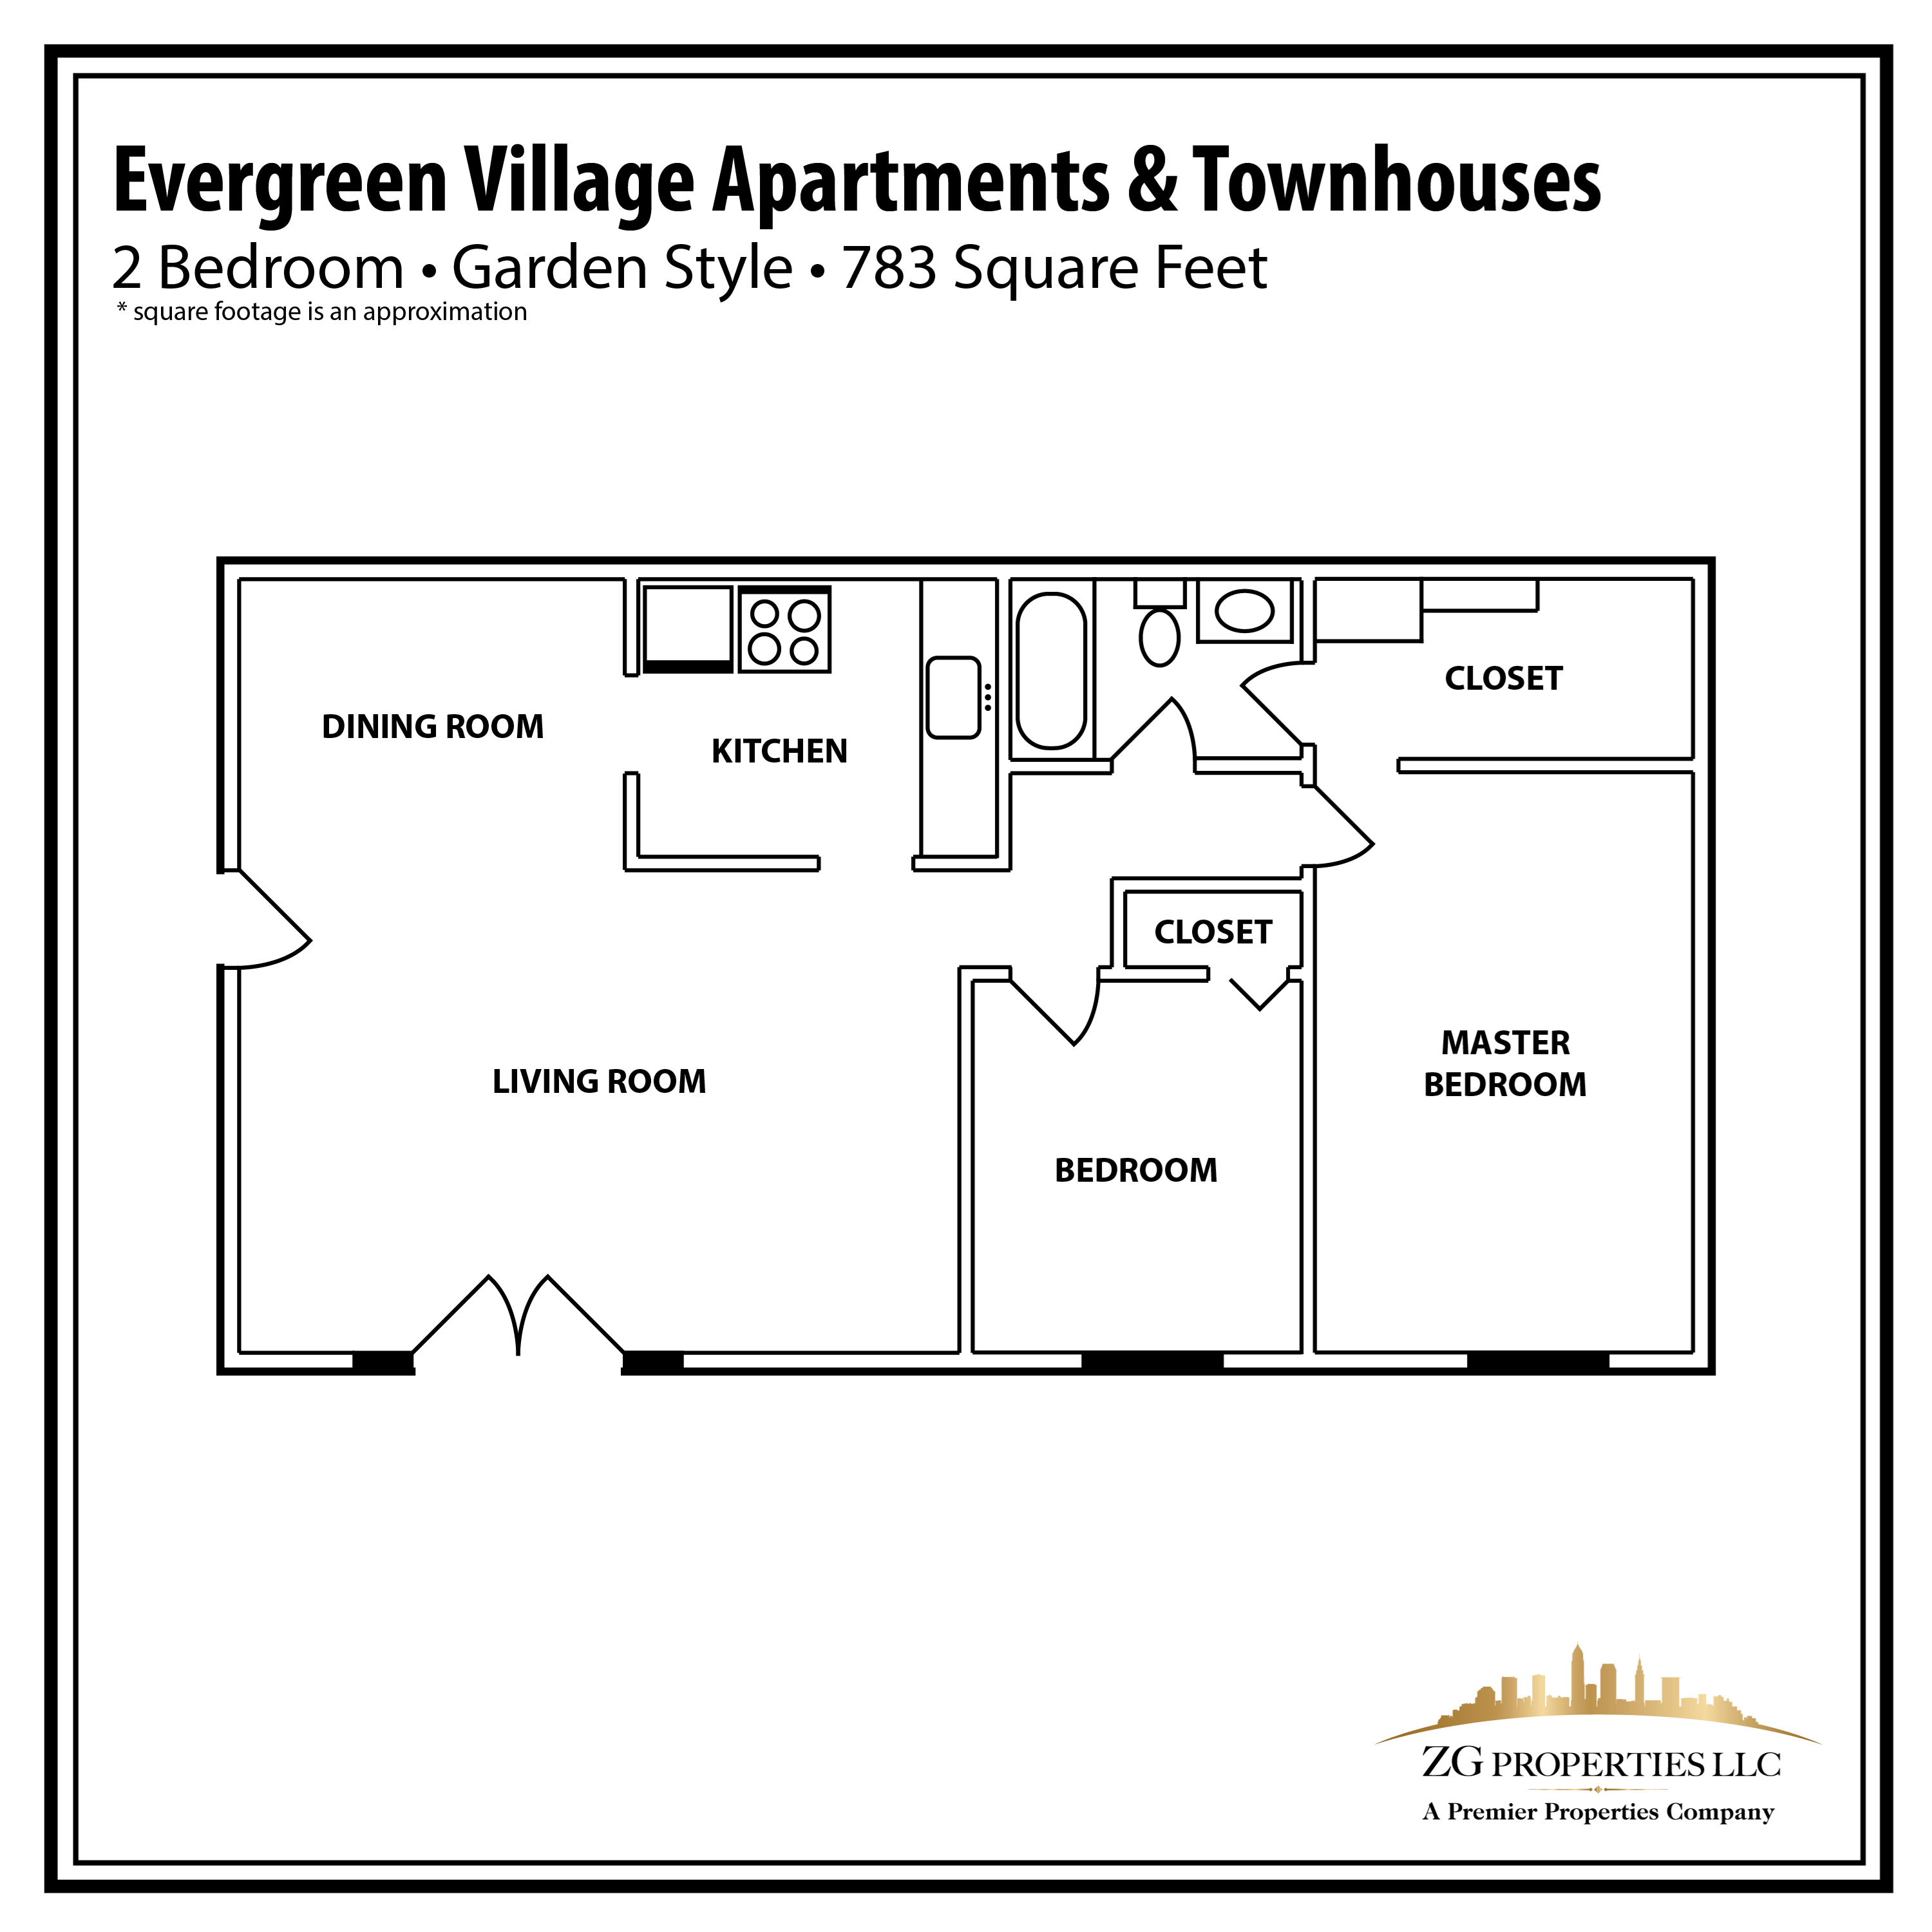 Floor Plans of Evergreen Village Apartments & Townhouses